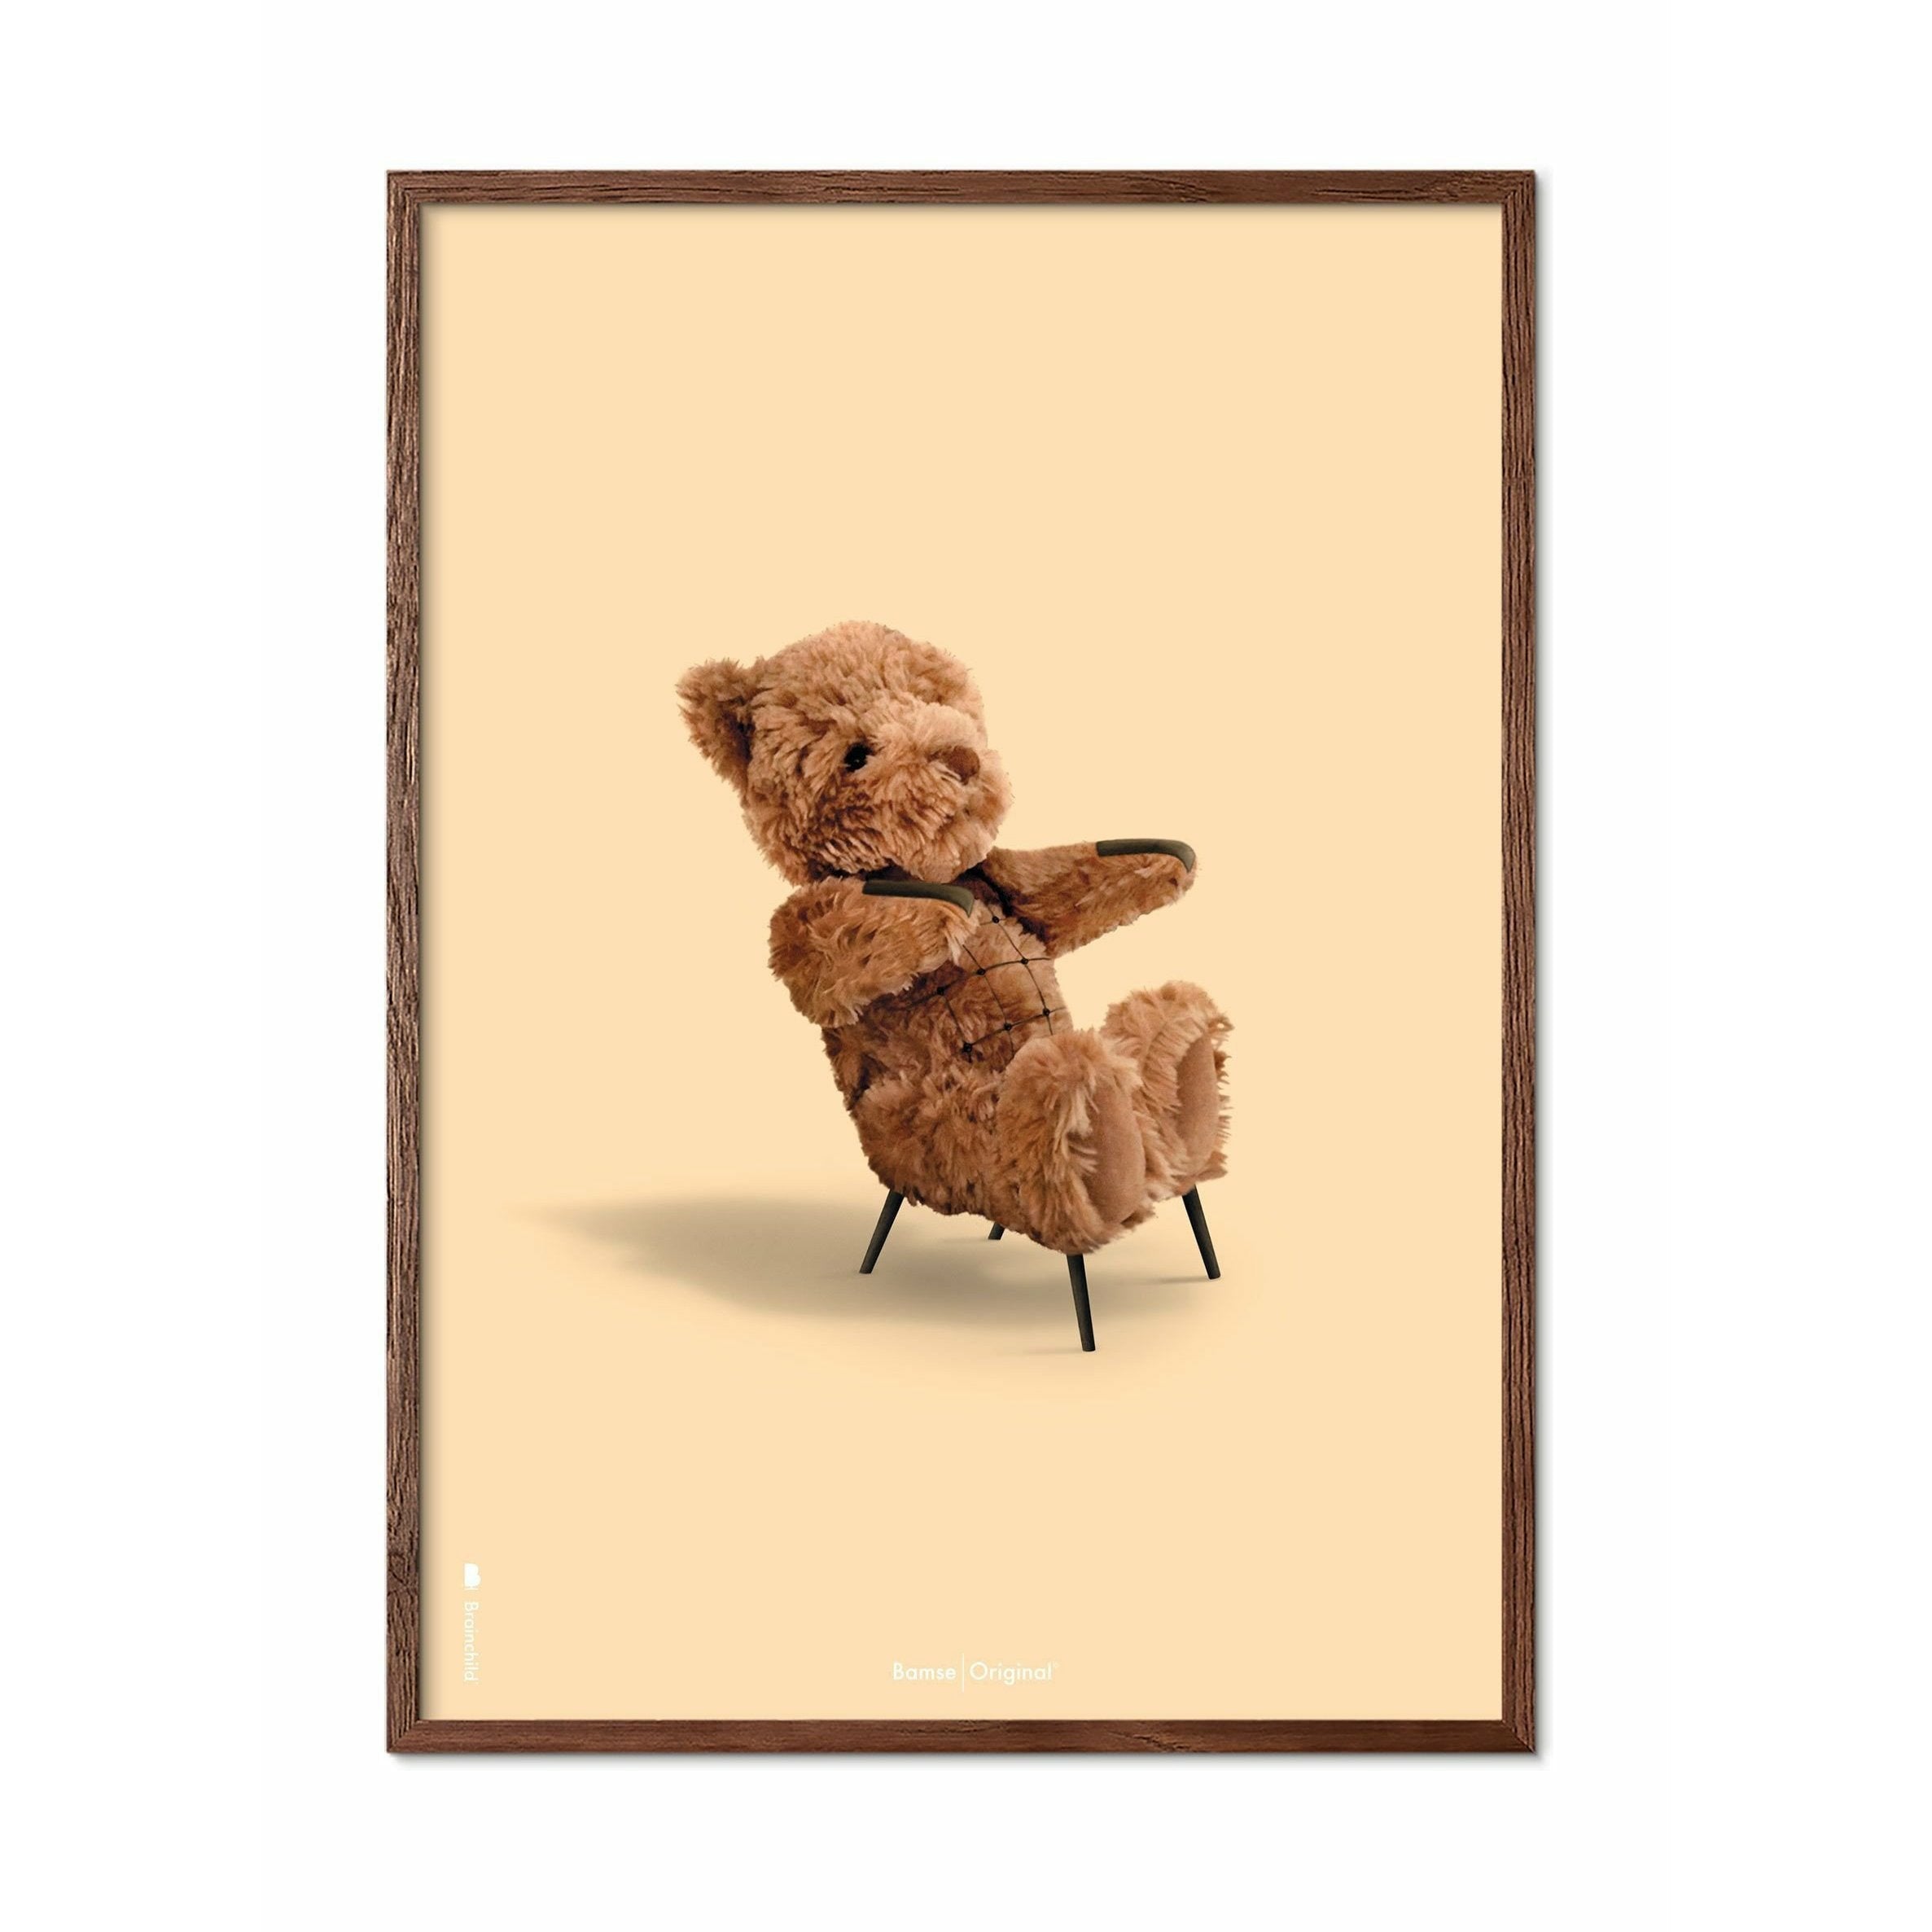 Brainchild Teddy Bear Classic Poster, Frame Made Of Dark Wood 30x40 Cm, Sand Colored Background